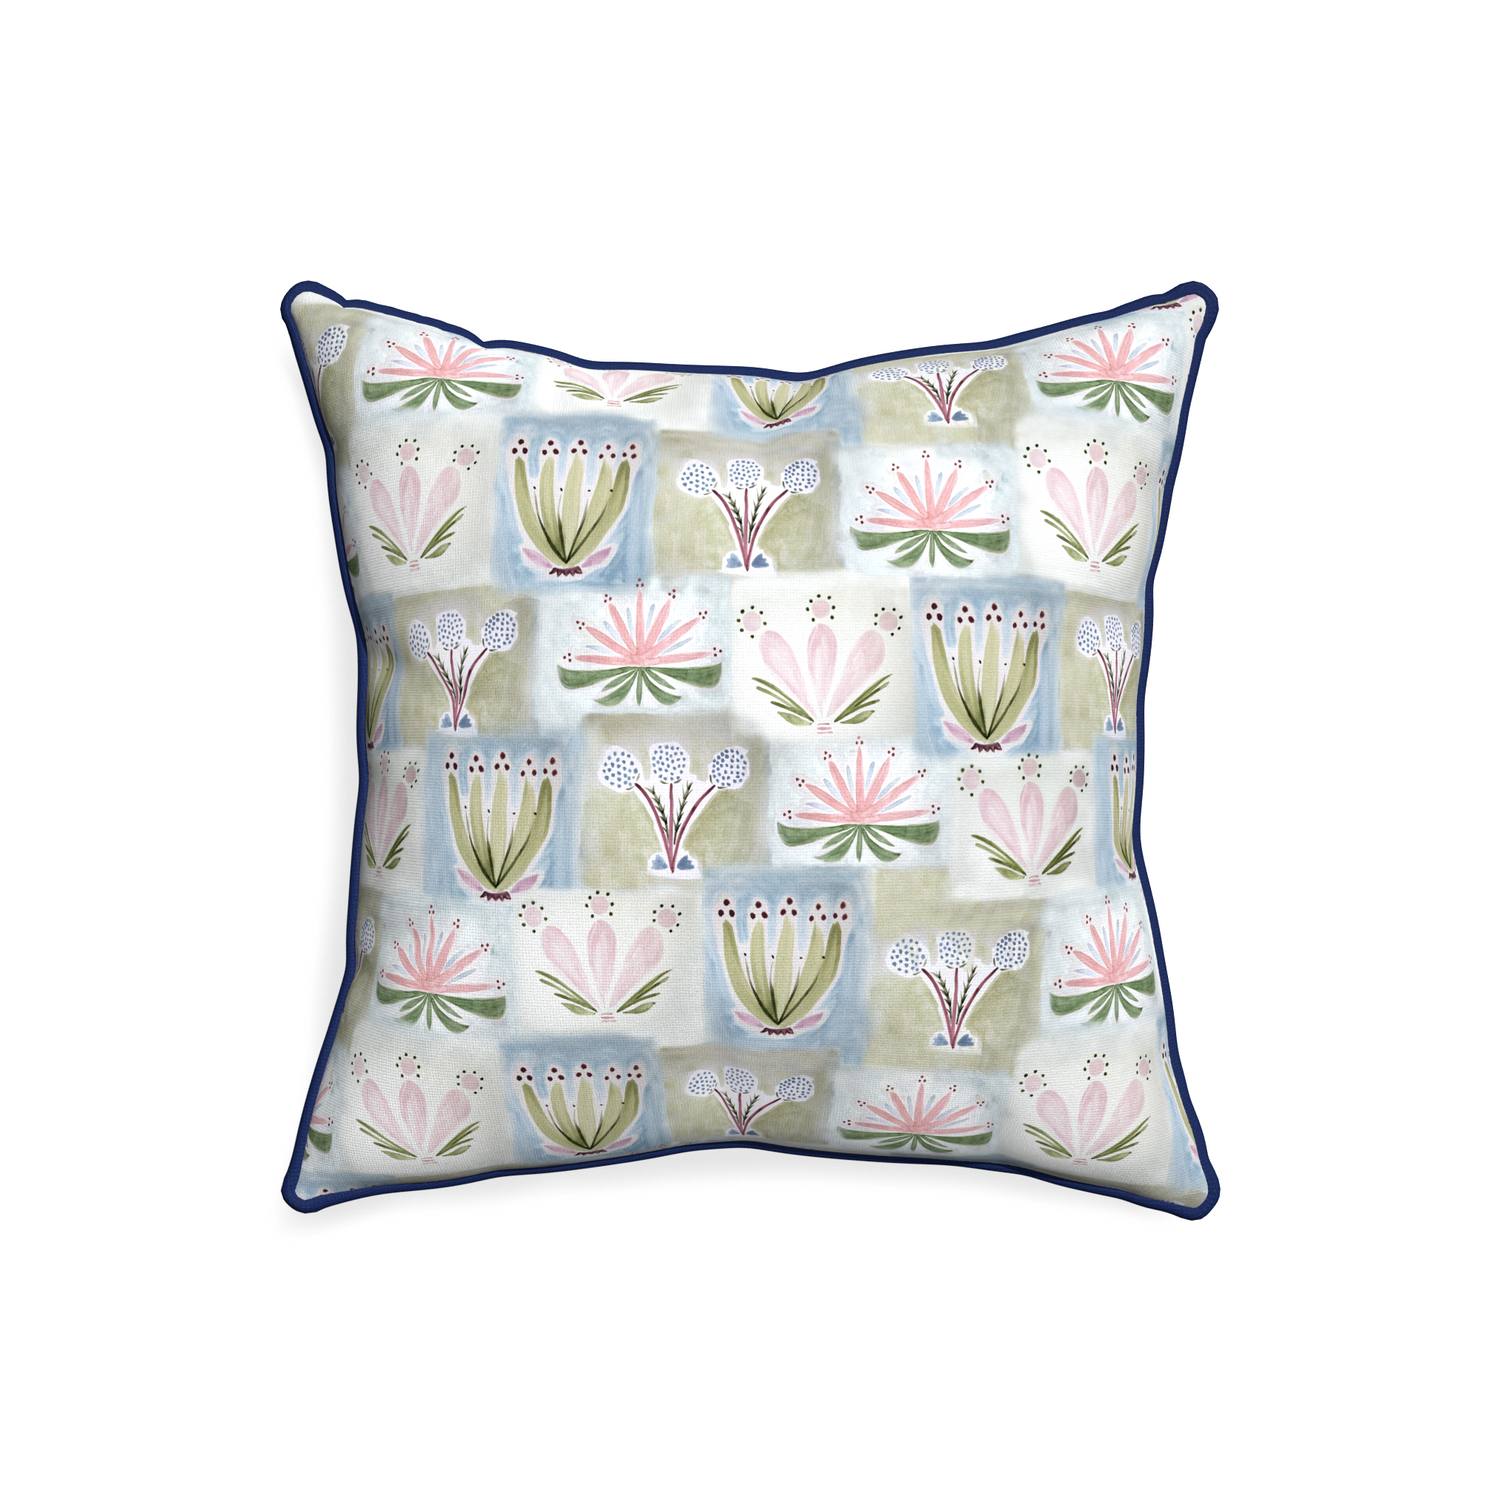 20-square harper custom hand-painted floralpillow with midnight piping on white background